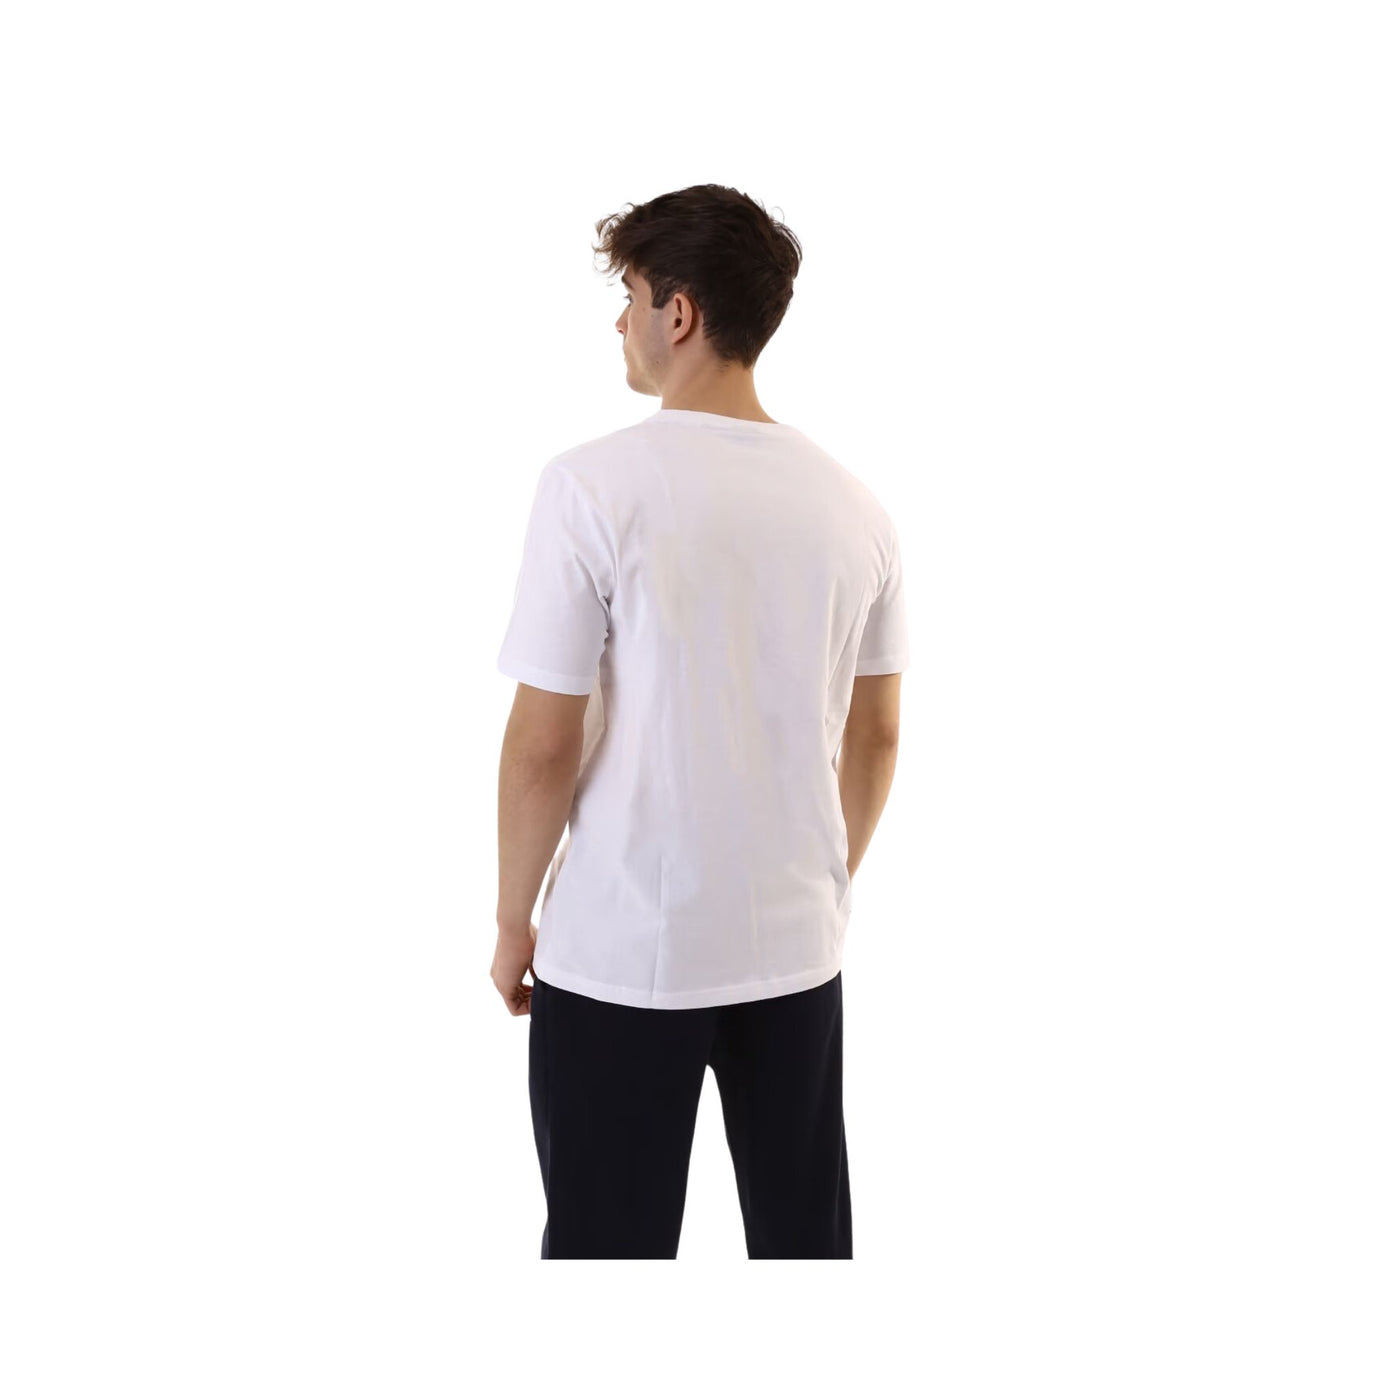 Men's T-shirt with print on the chest